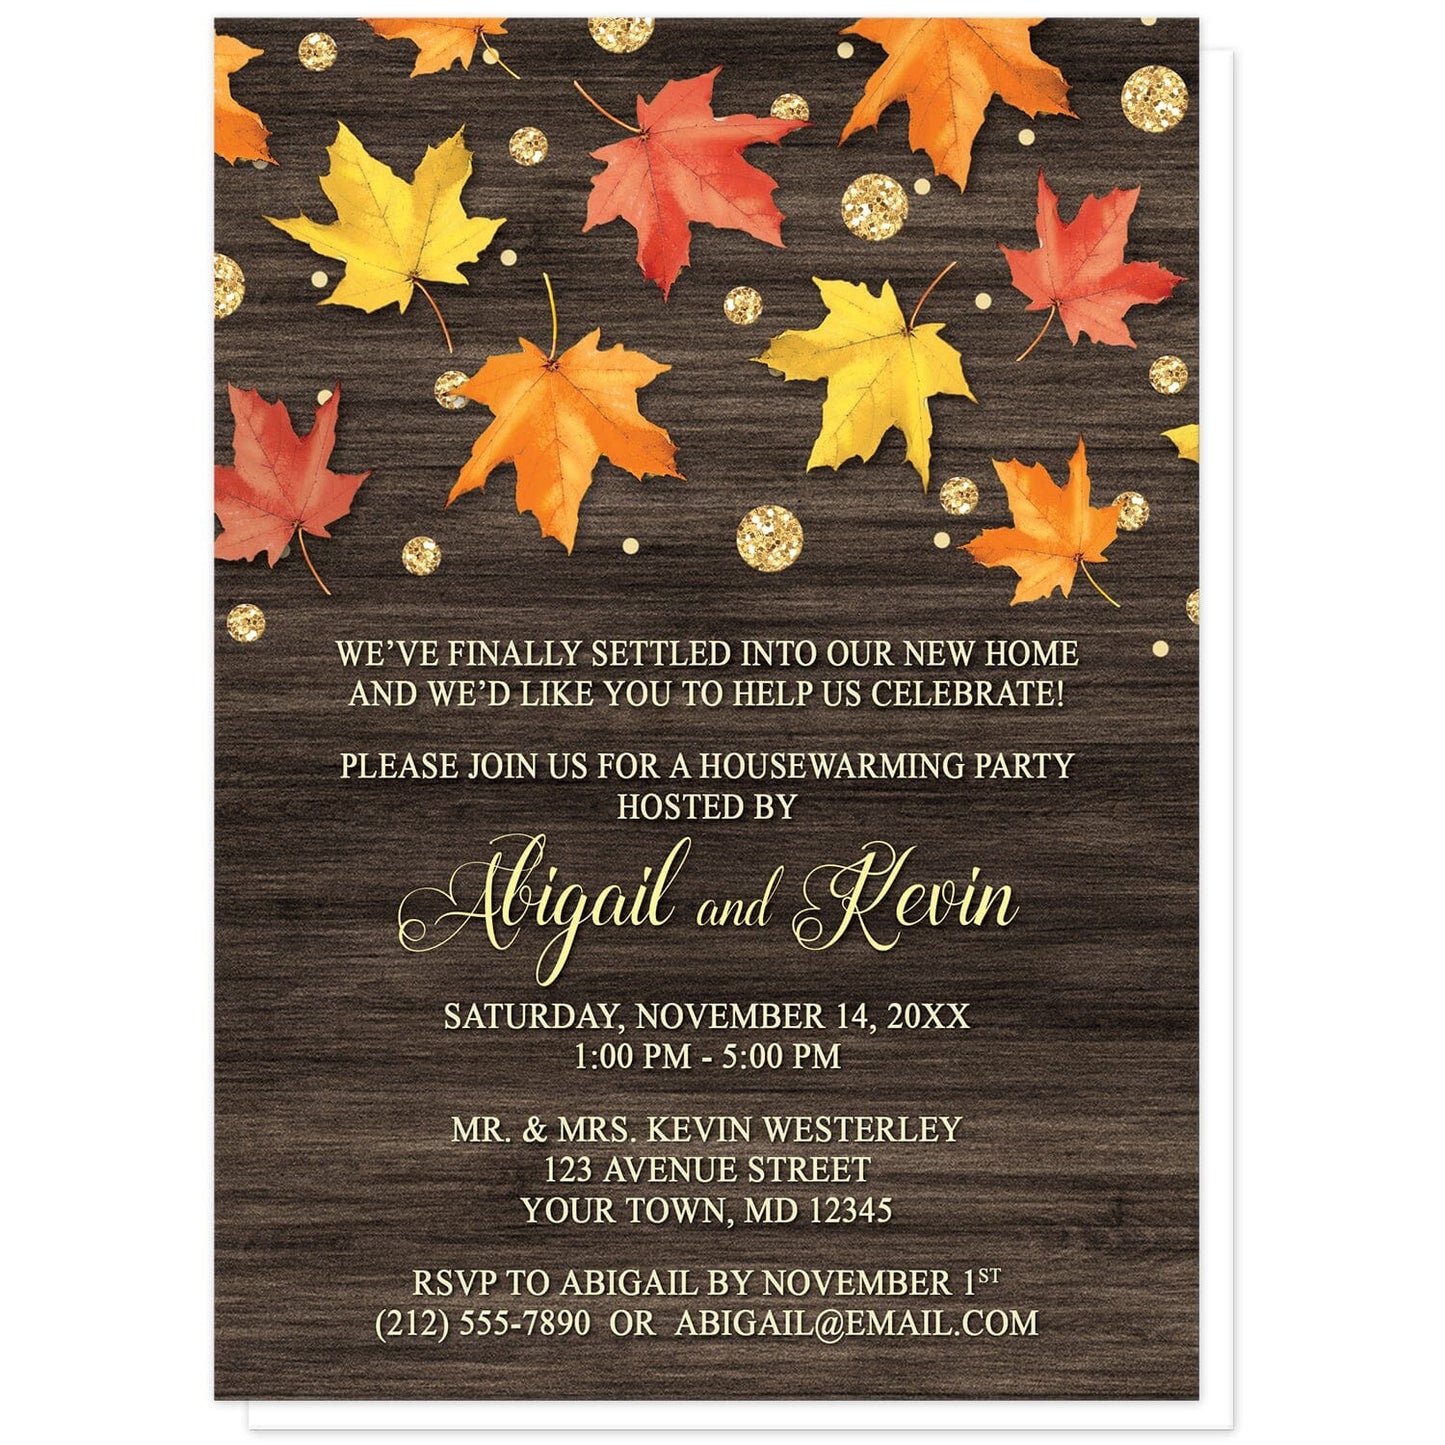 Falling Leaves with Gold Autumn Housewarming Invitations at Artistically Invited. Beautiful rustic falling leaves with gold autumn housewarming invitations with red, orange, and yellow leaves scattered and falling along the top, coupled with gold-colored glitter-illustrated circles, over a dark brown wood background. Your personalized housewarming celebration details are custom printed in yellow and light gold over the wood background below the leaves. 